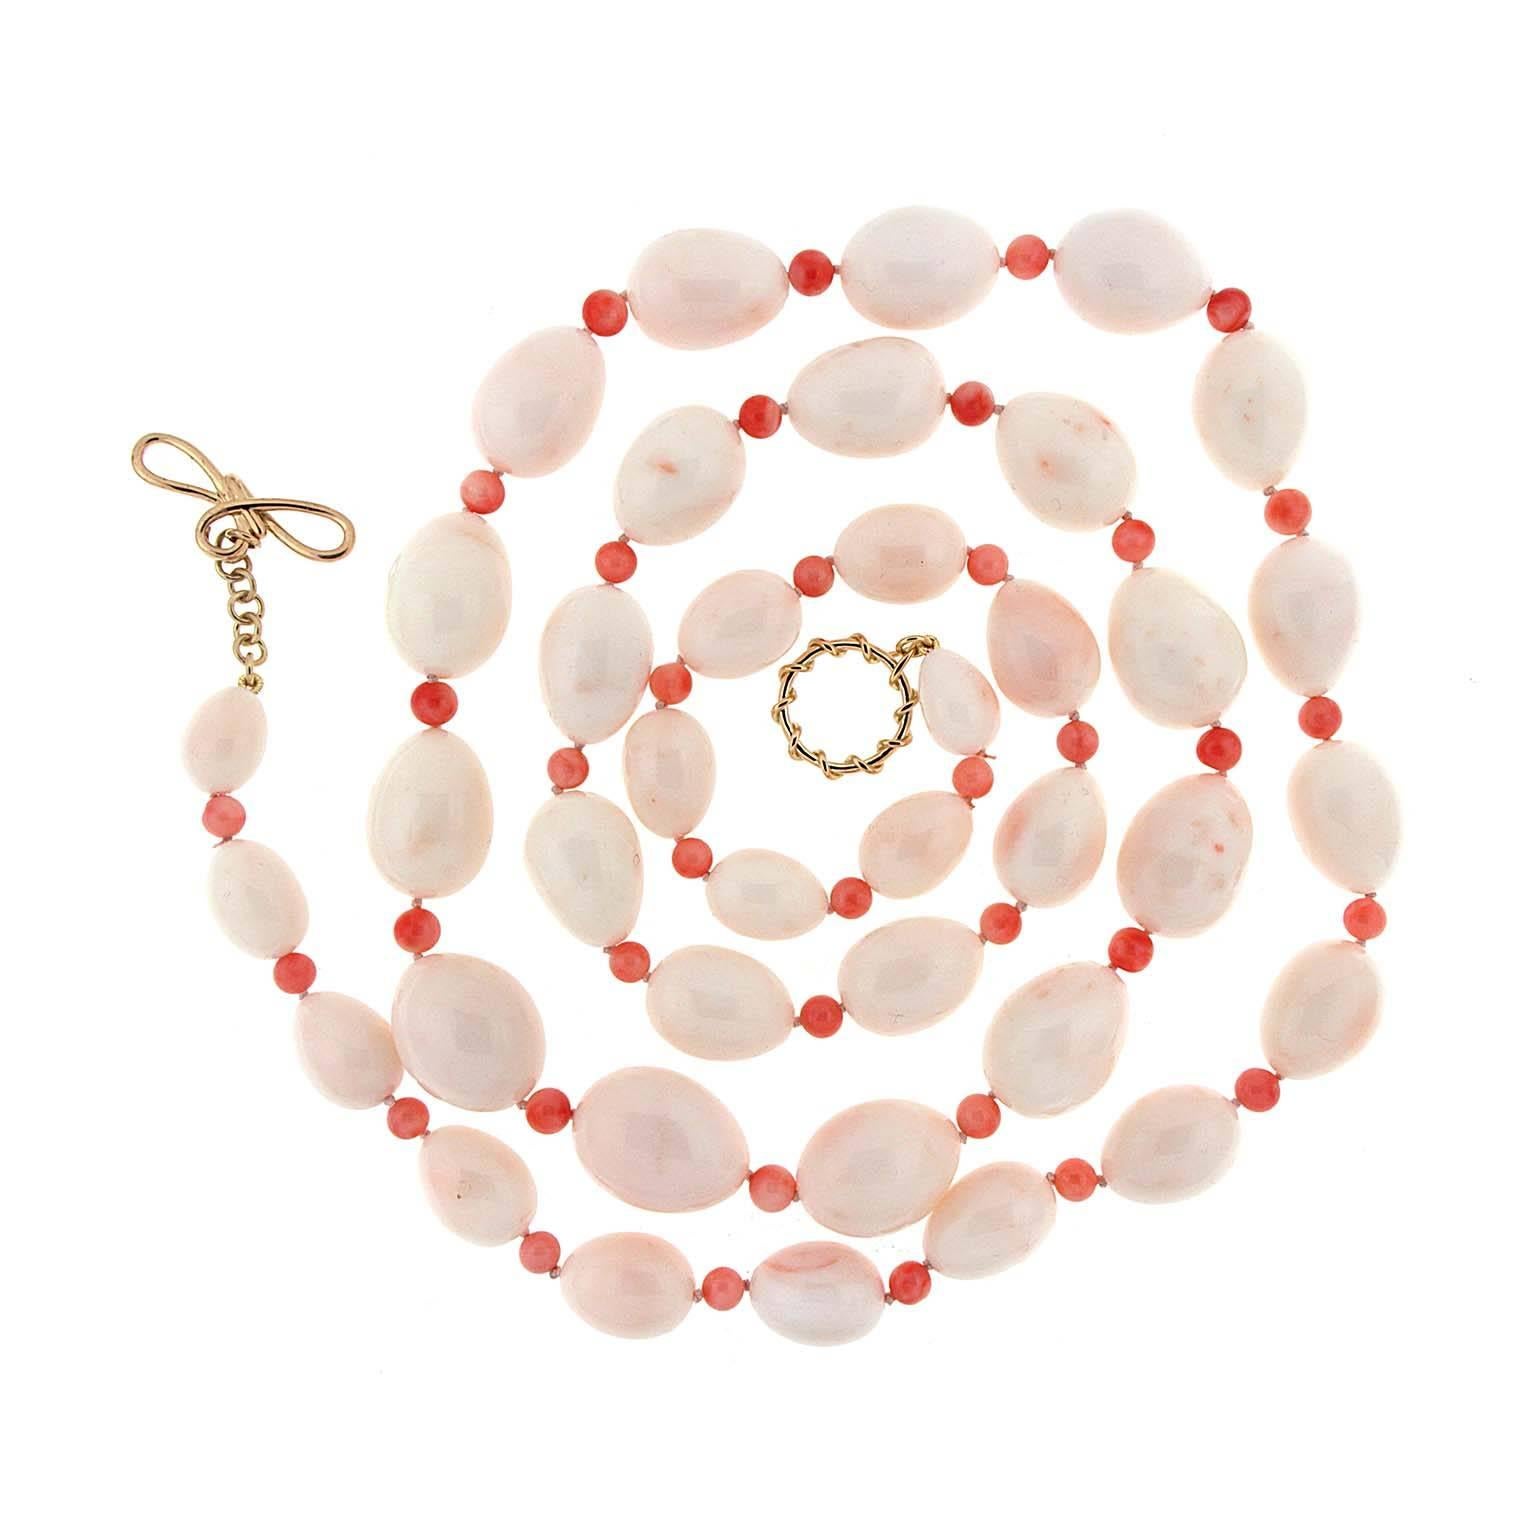 Creamy Pink Coral Drops and Red Coral Beads Necklace